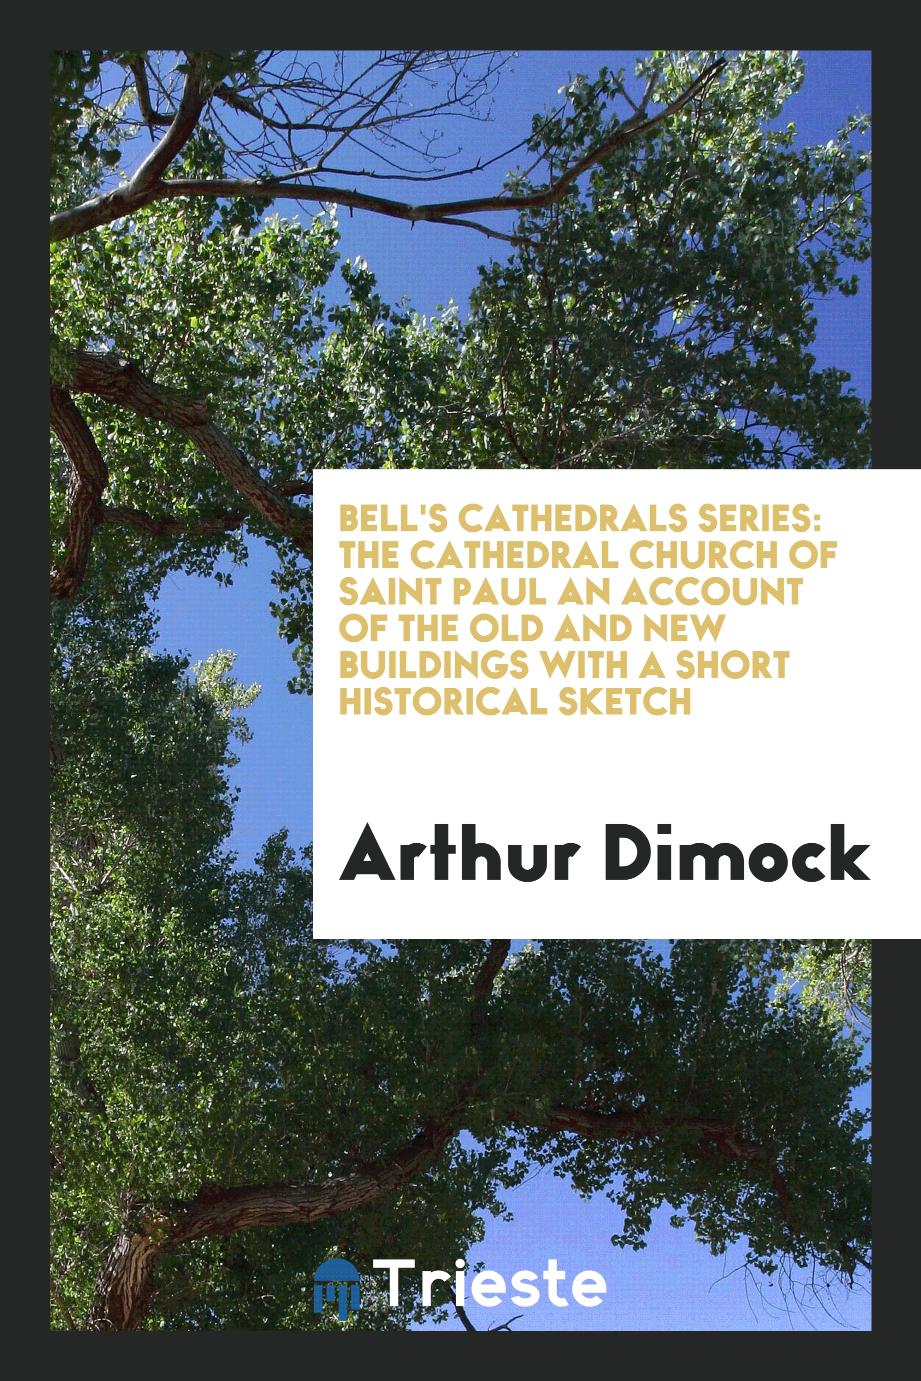 Bell's Cathedrals Series: The Cathedral Church of Saint Paul An Account of the Old and New Buildings with a Short Historical Sketch